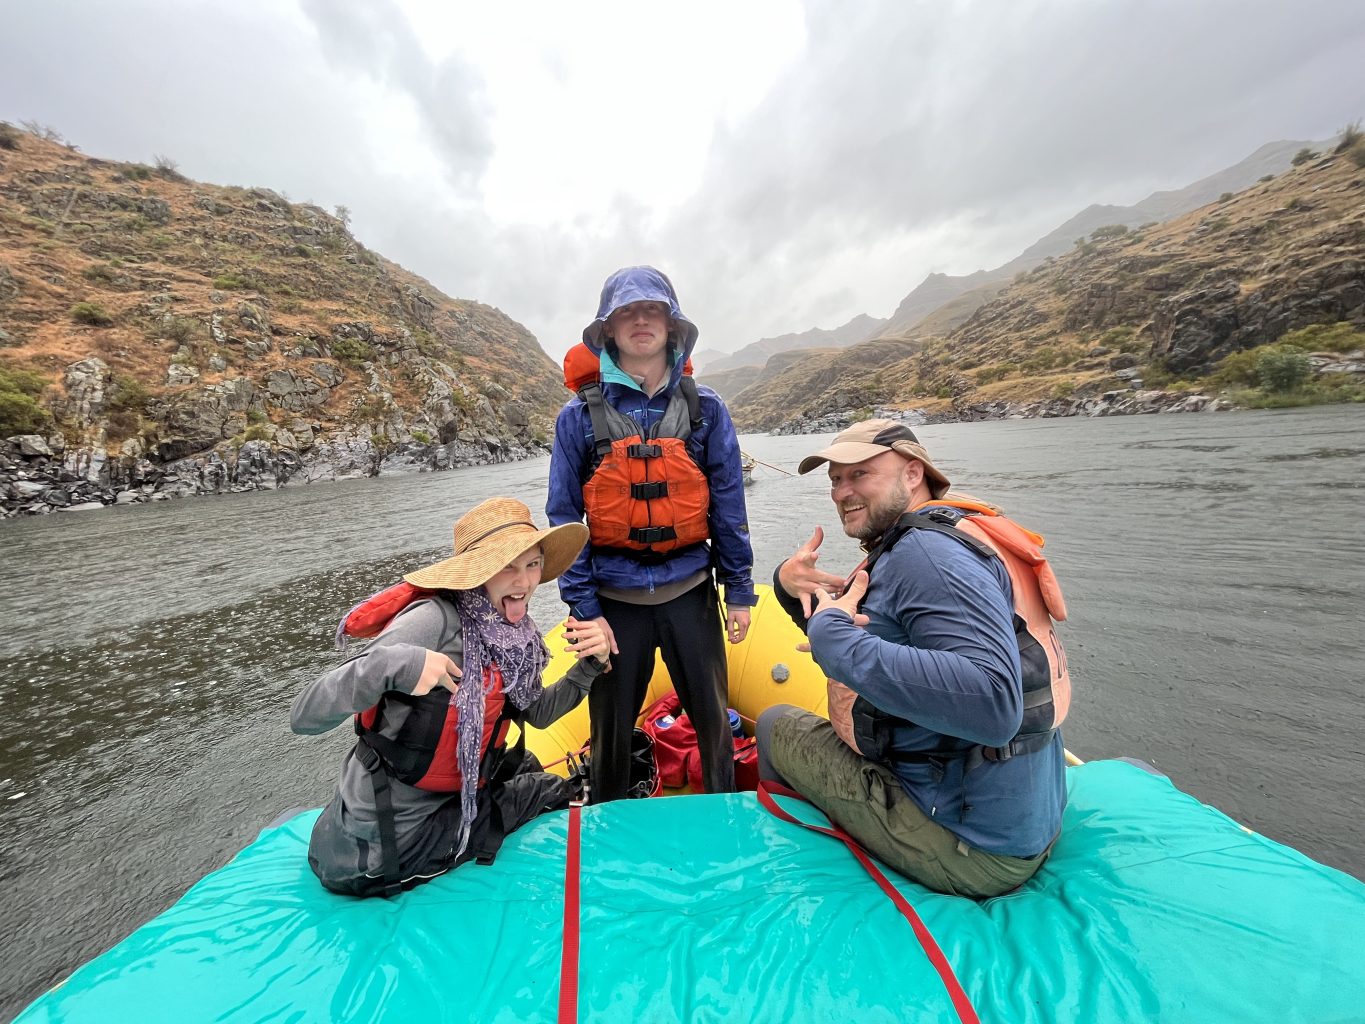 A family goofs around on a drizzly day on the Snake River